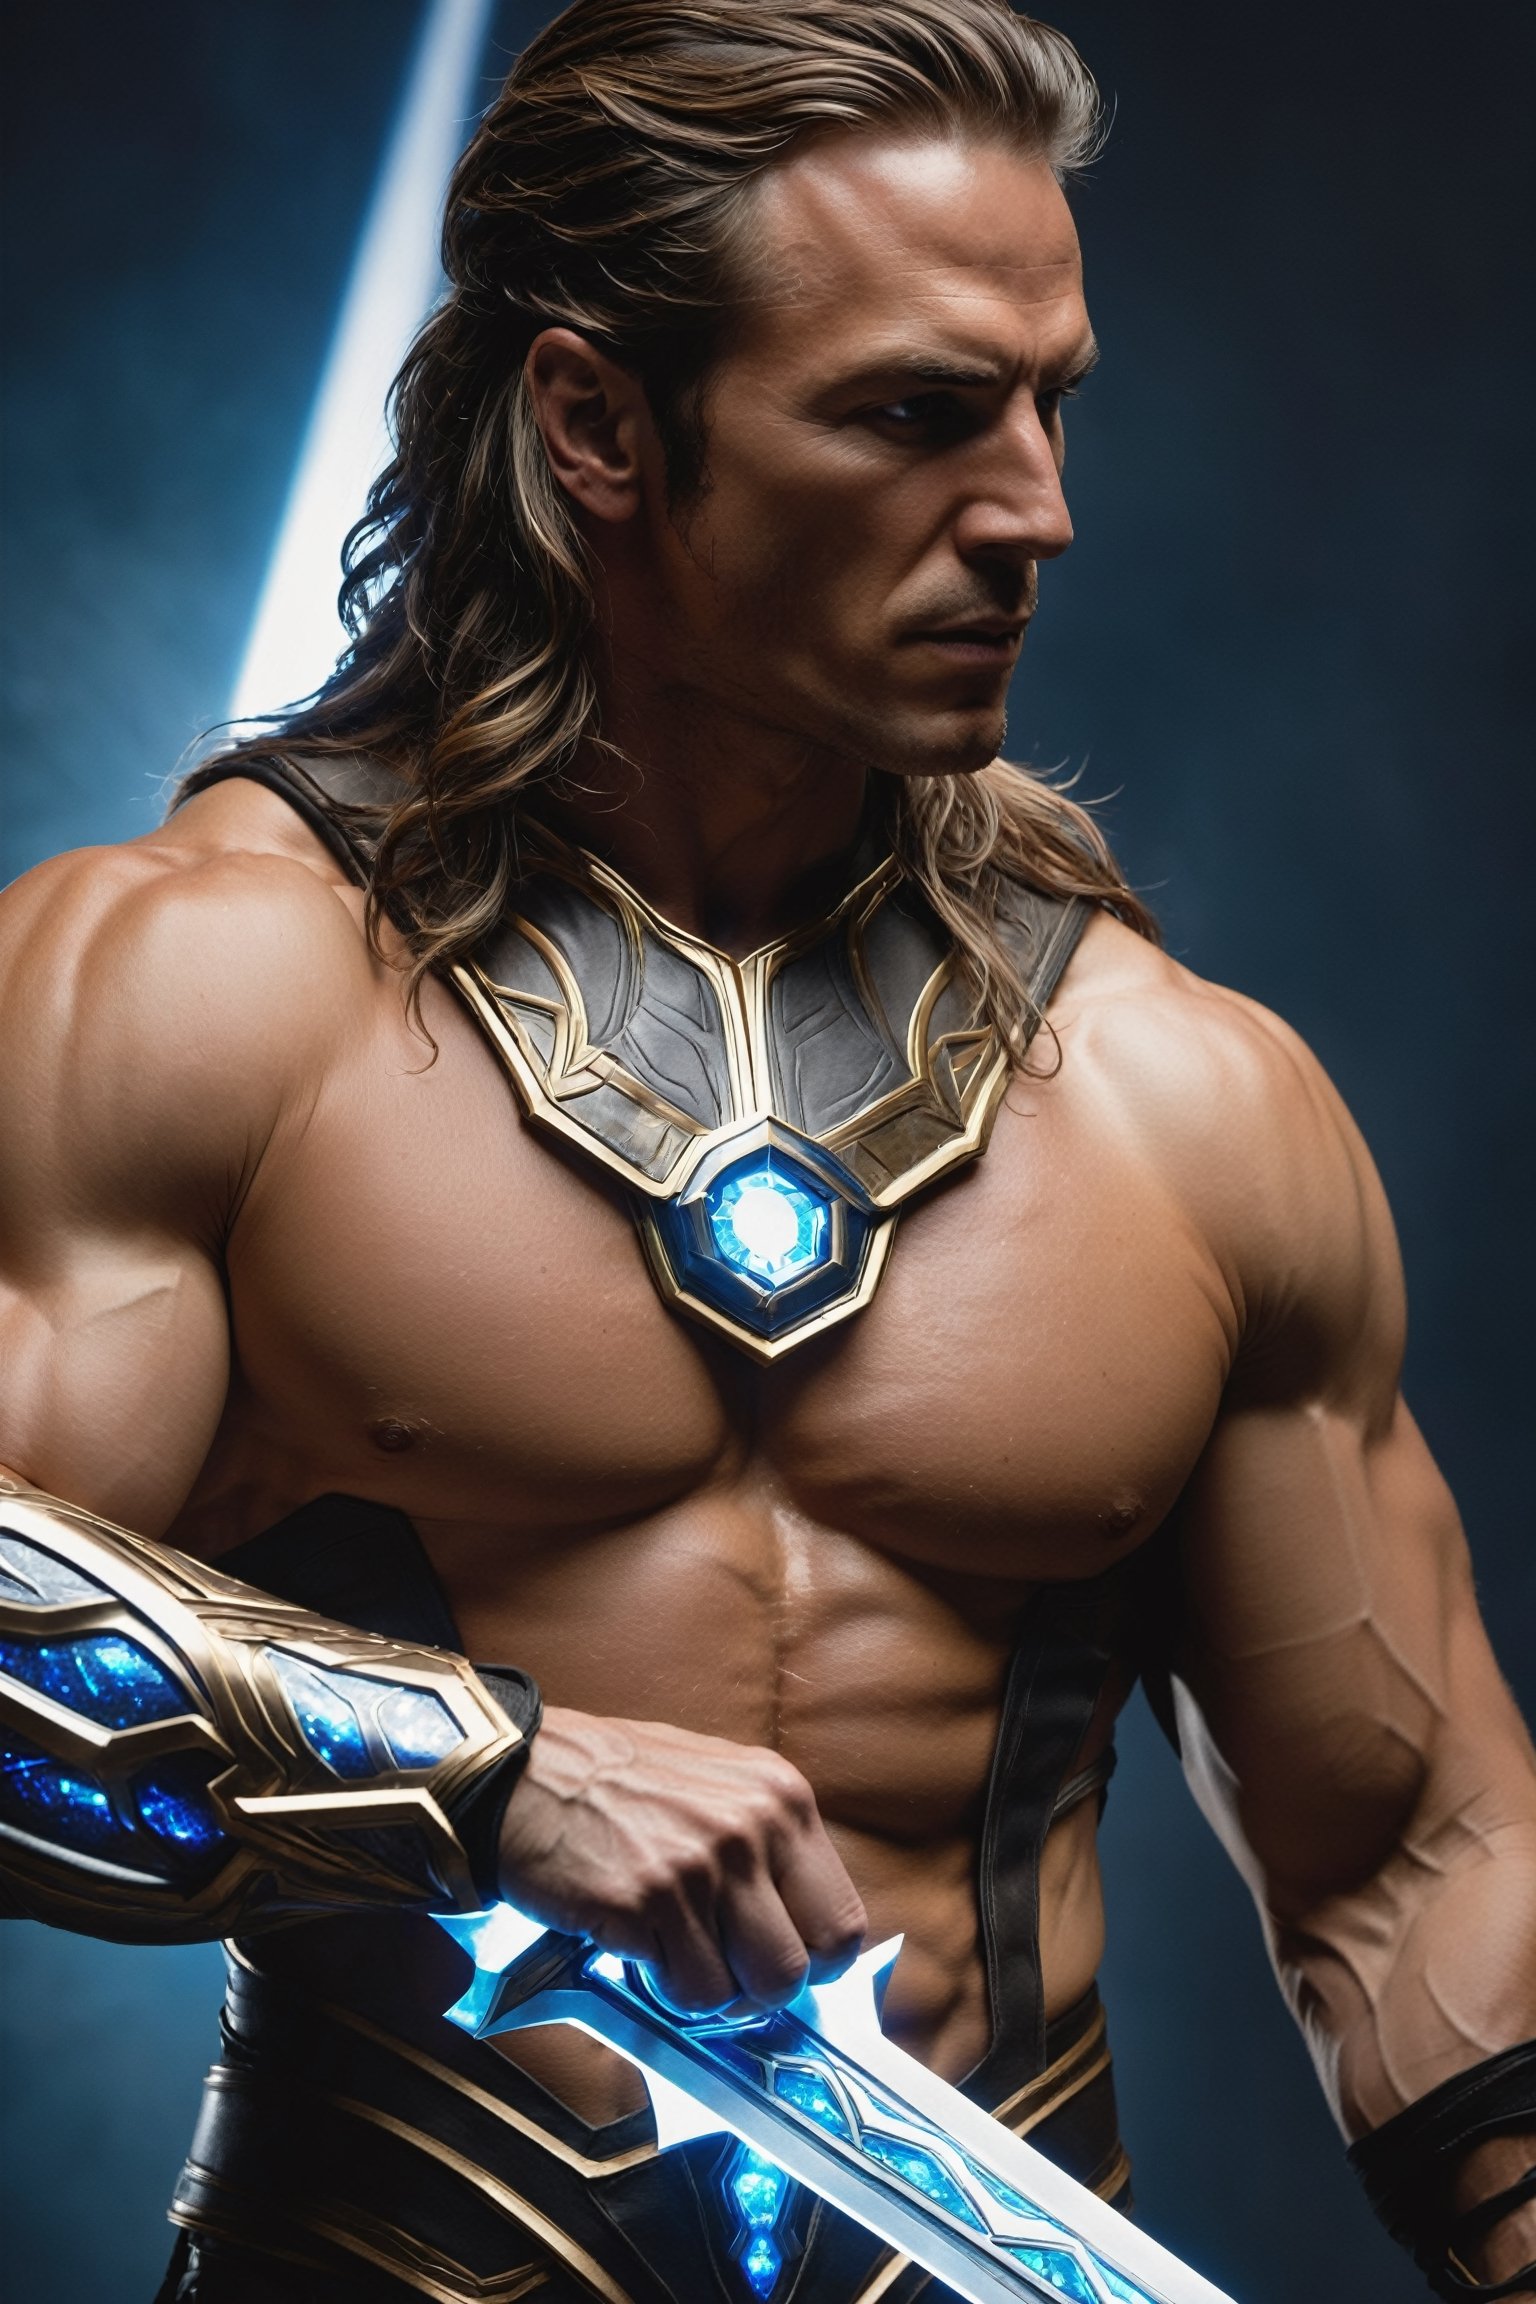 Quantum Mageblade, a towering figure with bulging muscles, seamlessly melds futuristic technology with mystical sorcery. Wielding a shimmering energy sword, Quantum Mageblade harnesses the power of quantum magic to cut through both physical and metaphysical barriers, defending the realms from futuristic threats.